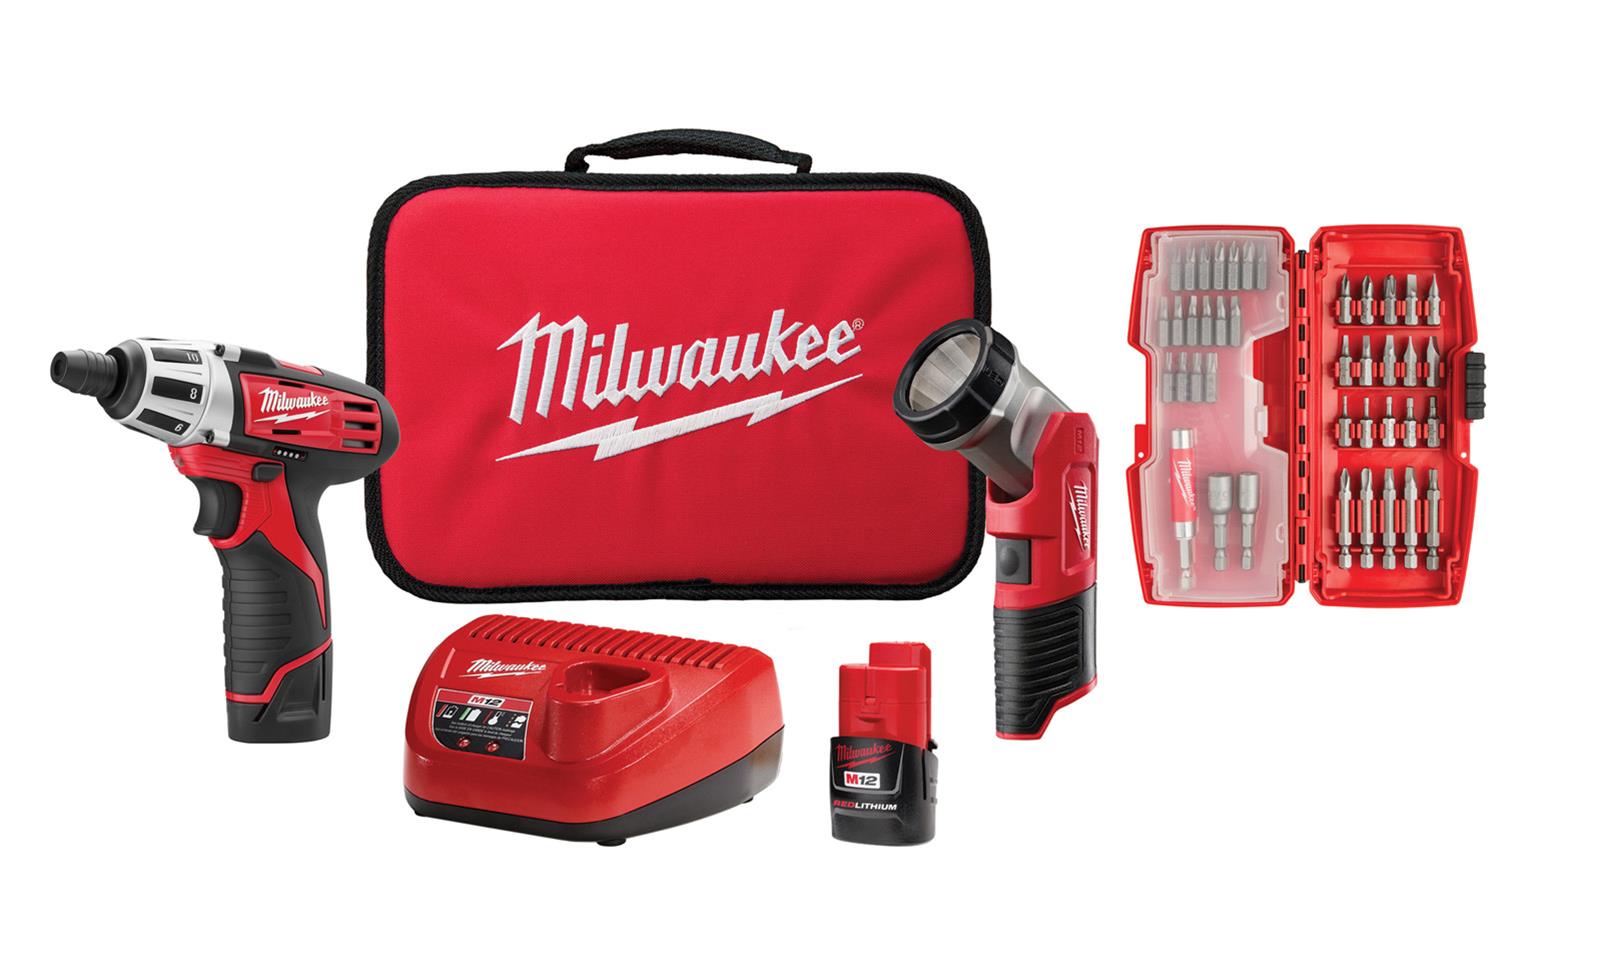 Milwaukee 2401-22 12V Li-Ion 1/4" Cordless Drill/Driver for sale online